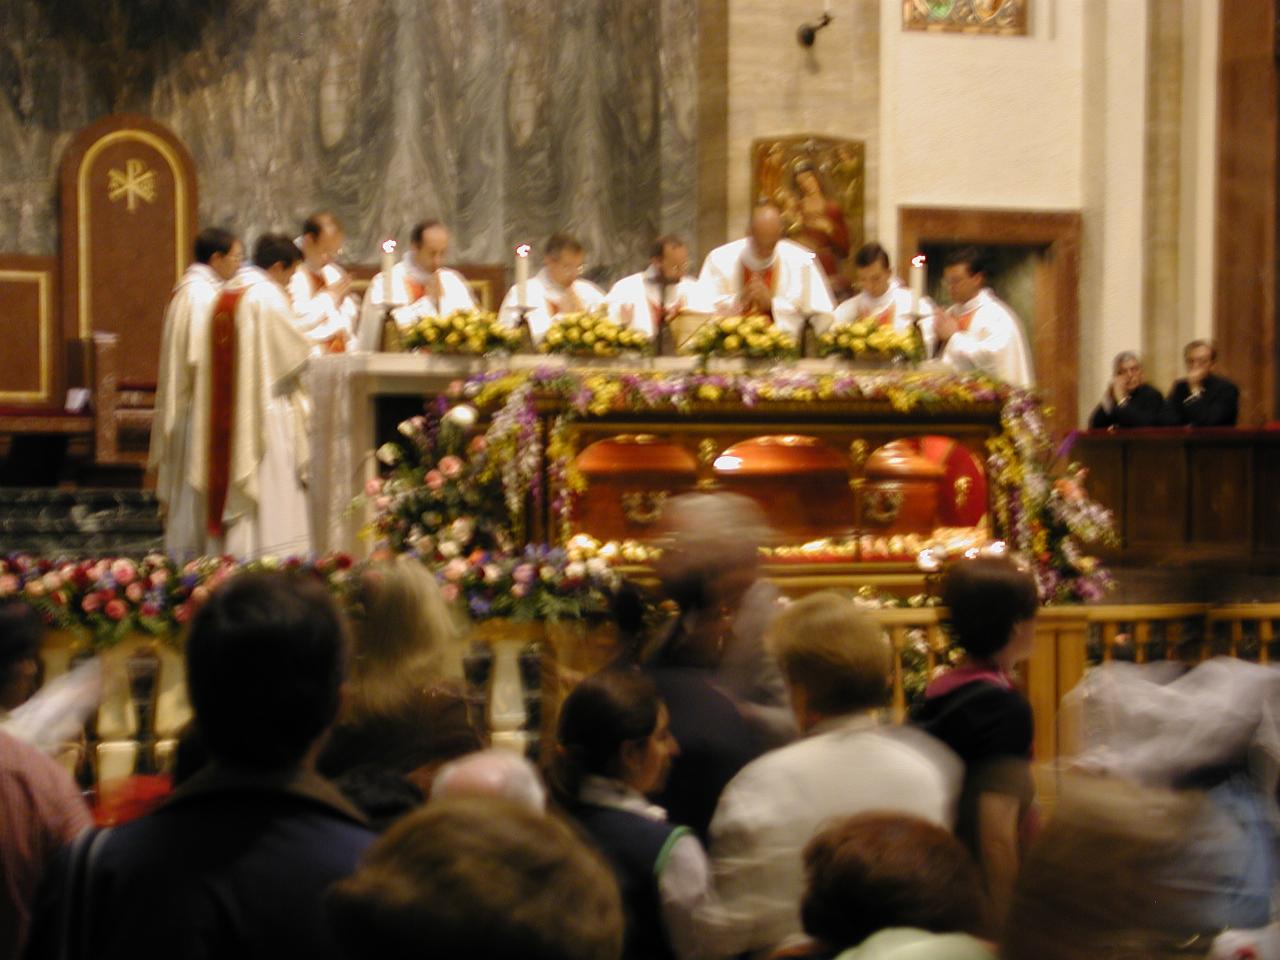 Mass at St. Eugene's and Saint Joesmaria's remains